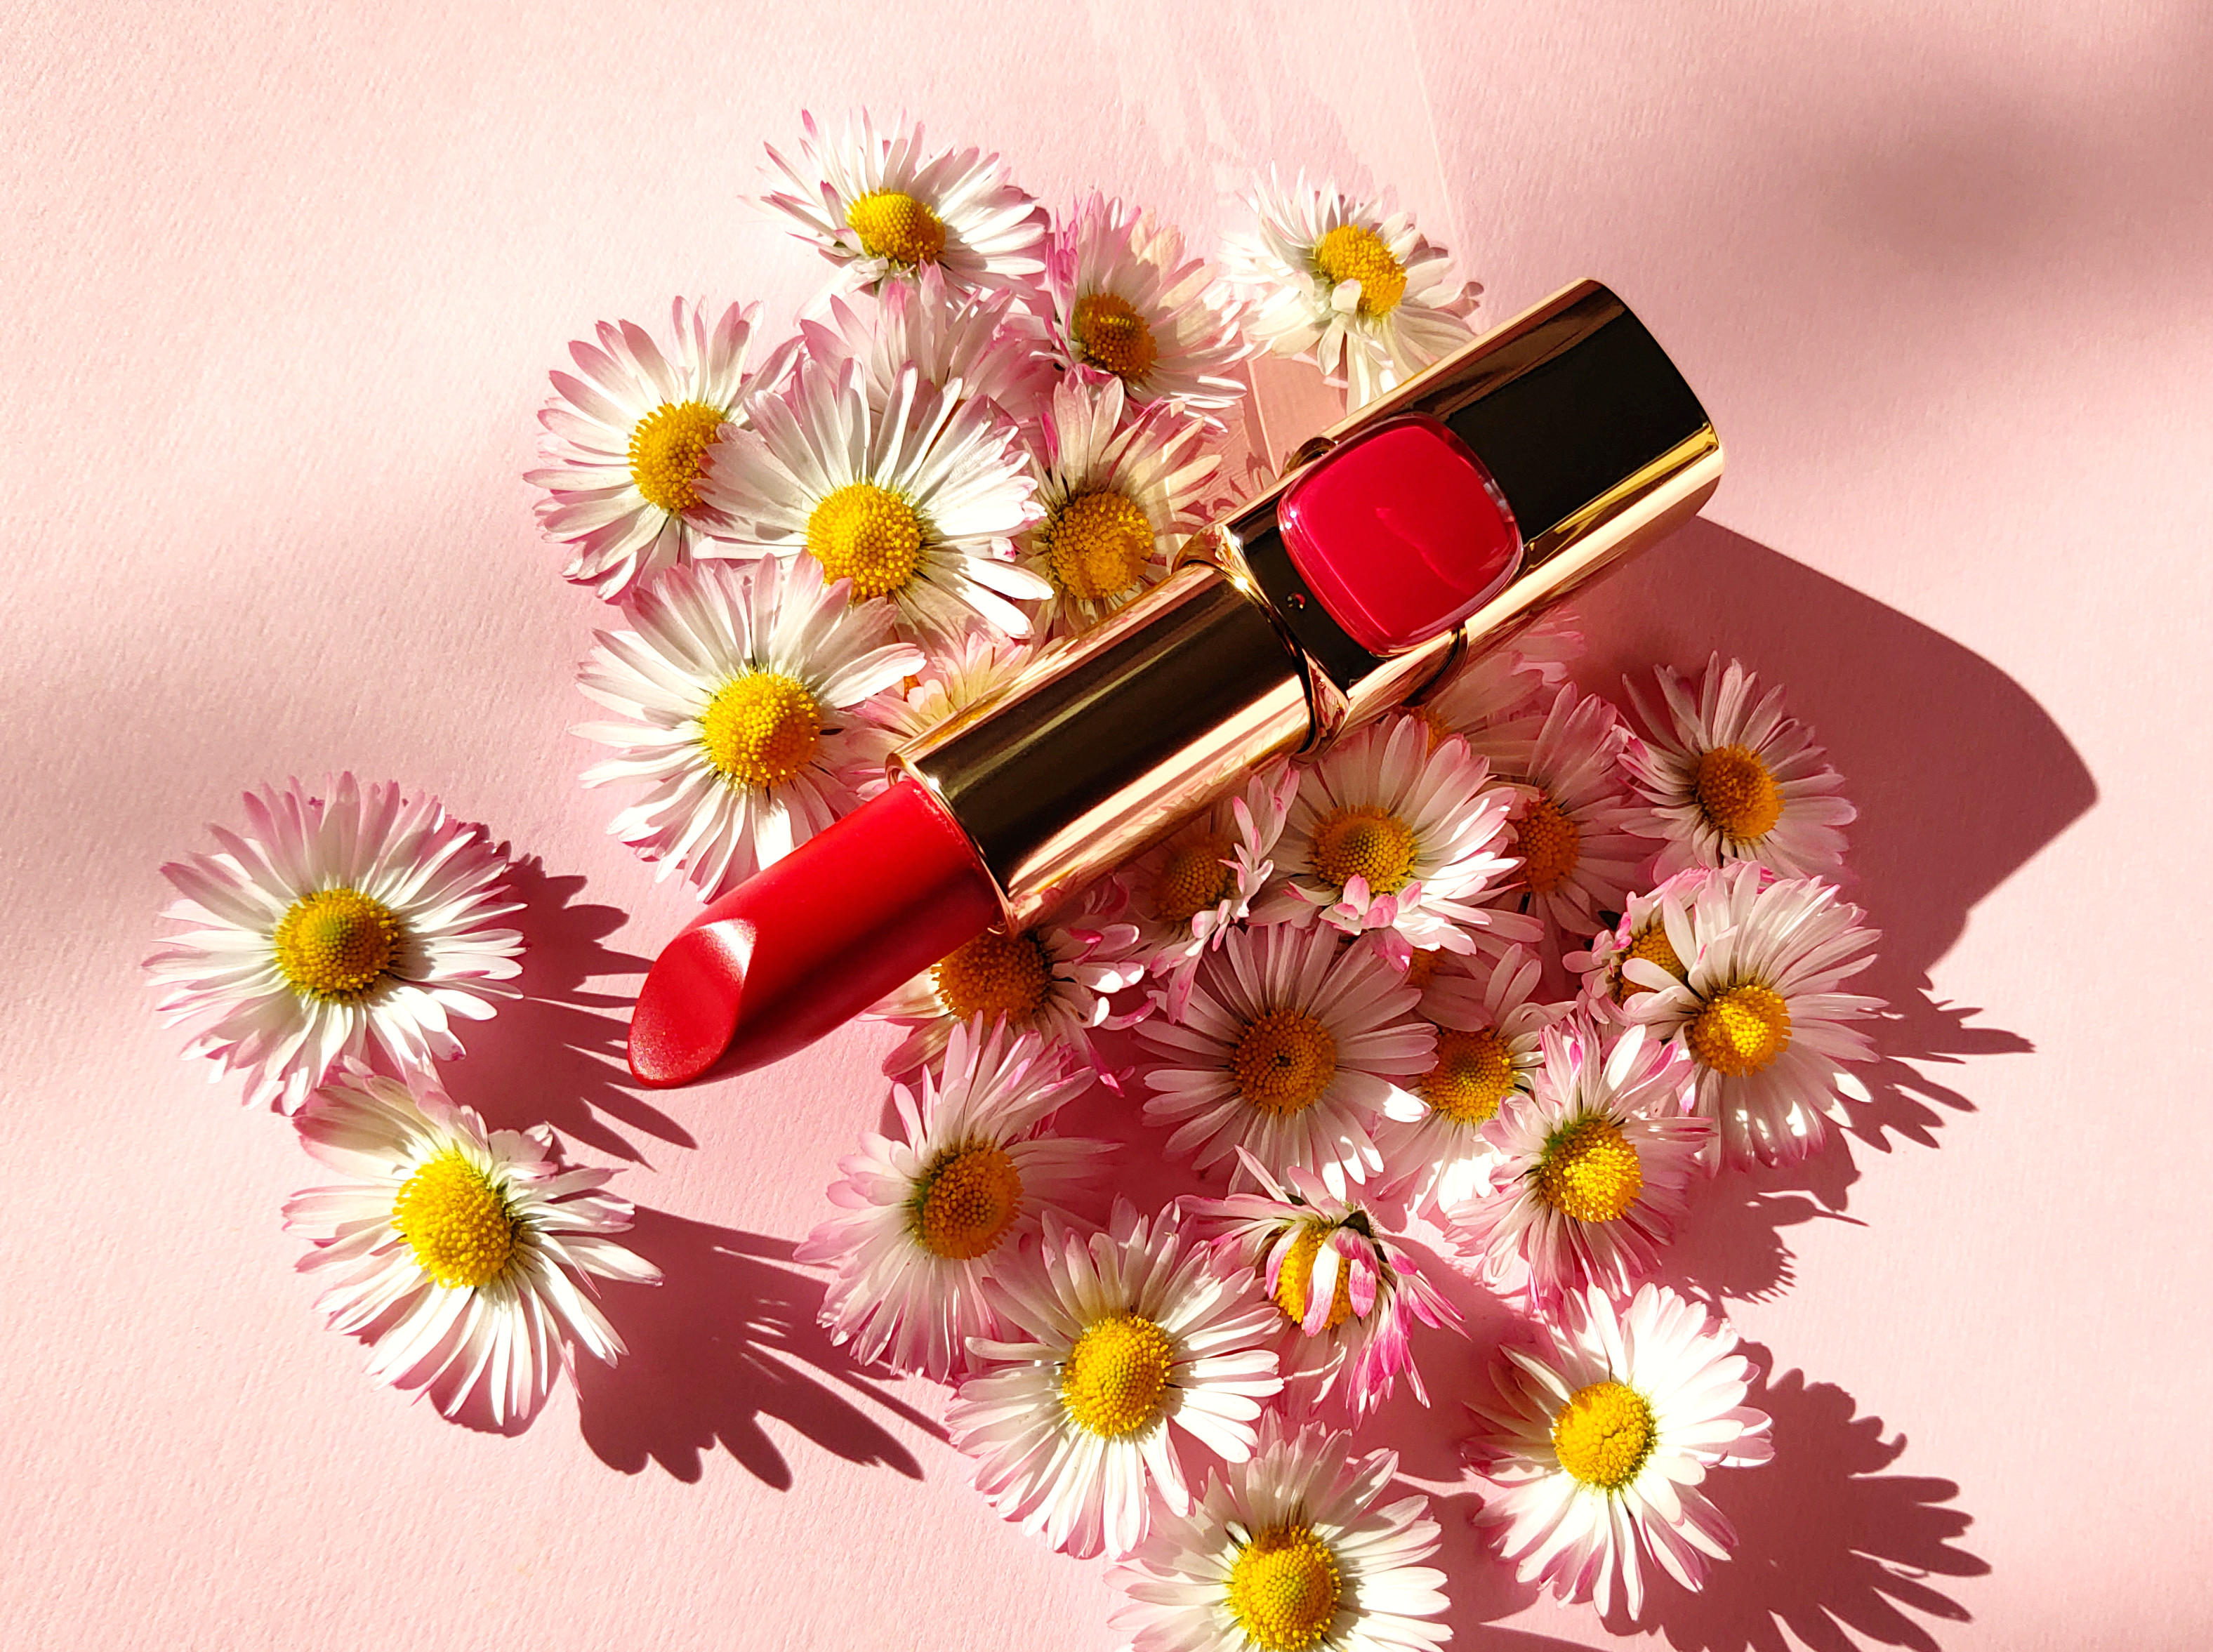 L’Oréal Paris Color Riche Lipstick in R514 Pearly Rubie Follie opened on a bouquet of daisies.